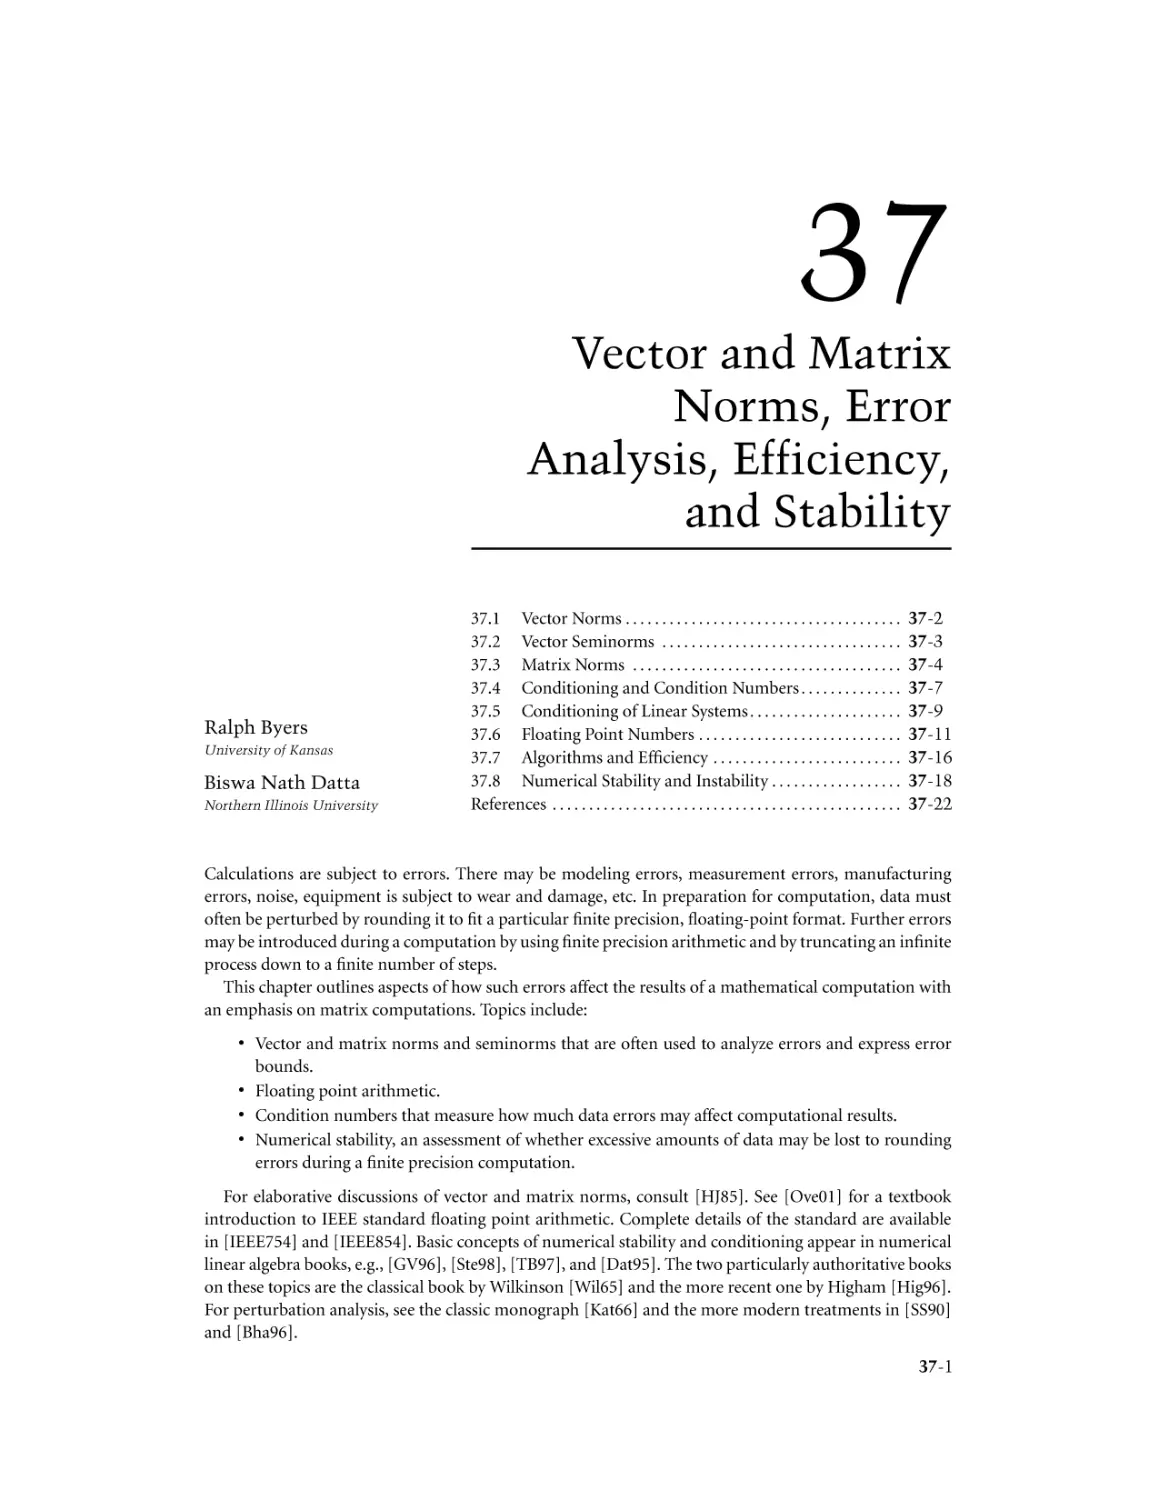 Chapter 37. Vector and Matrix Norms, Error Analysis, Efficiency, and Stability